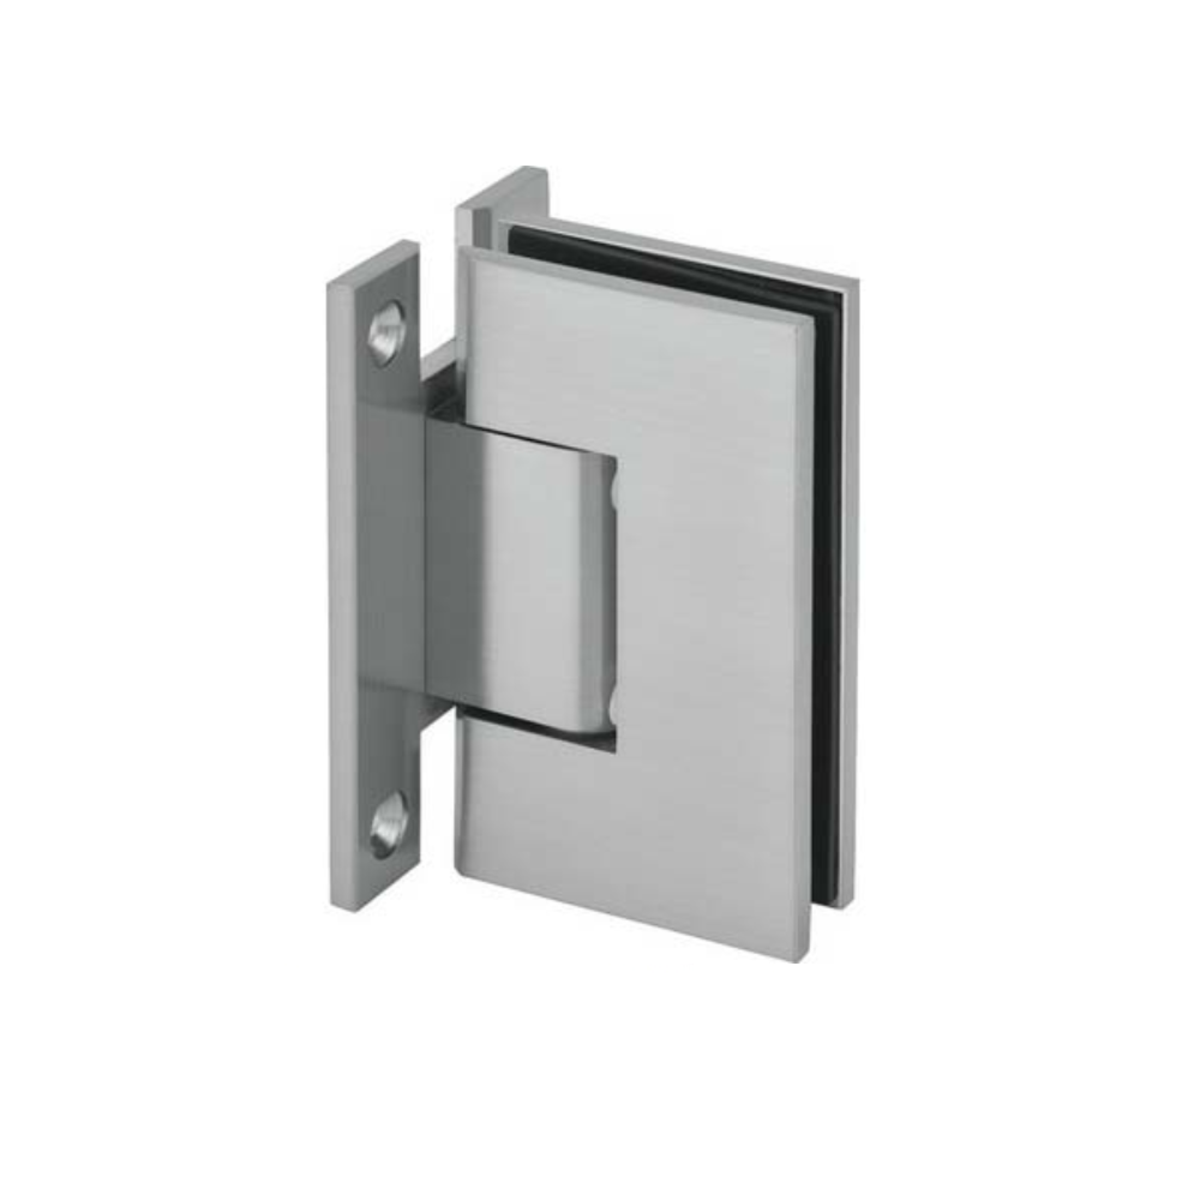 Wall to Glass "H" Back Plate Hinge